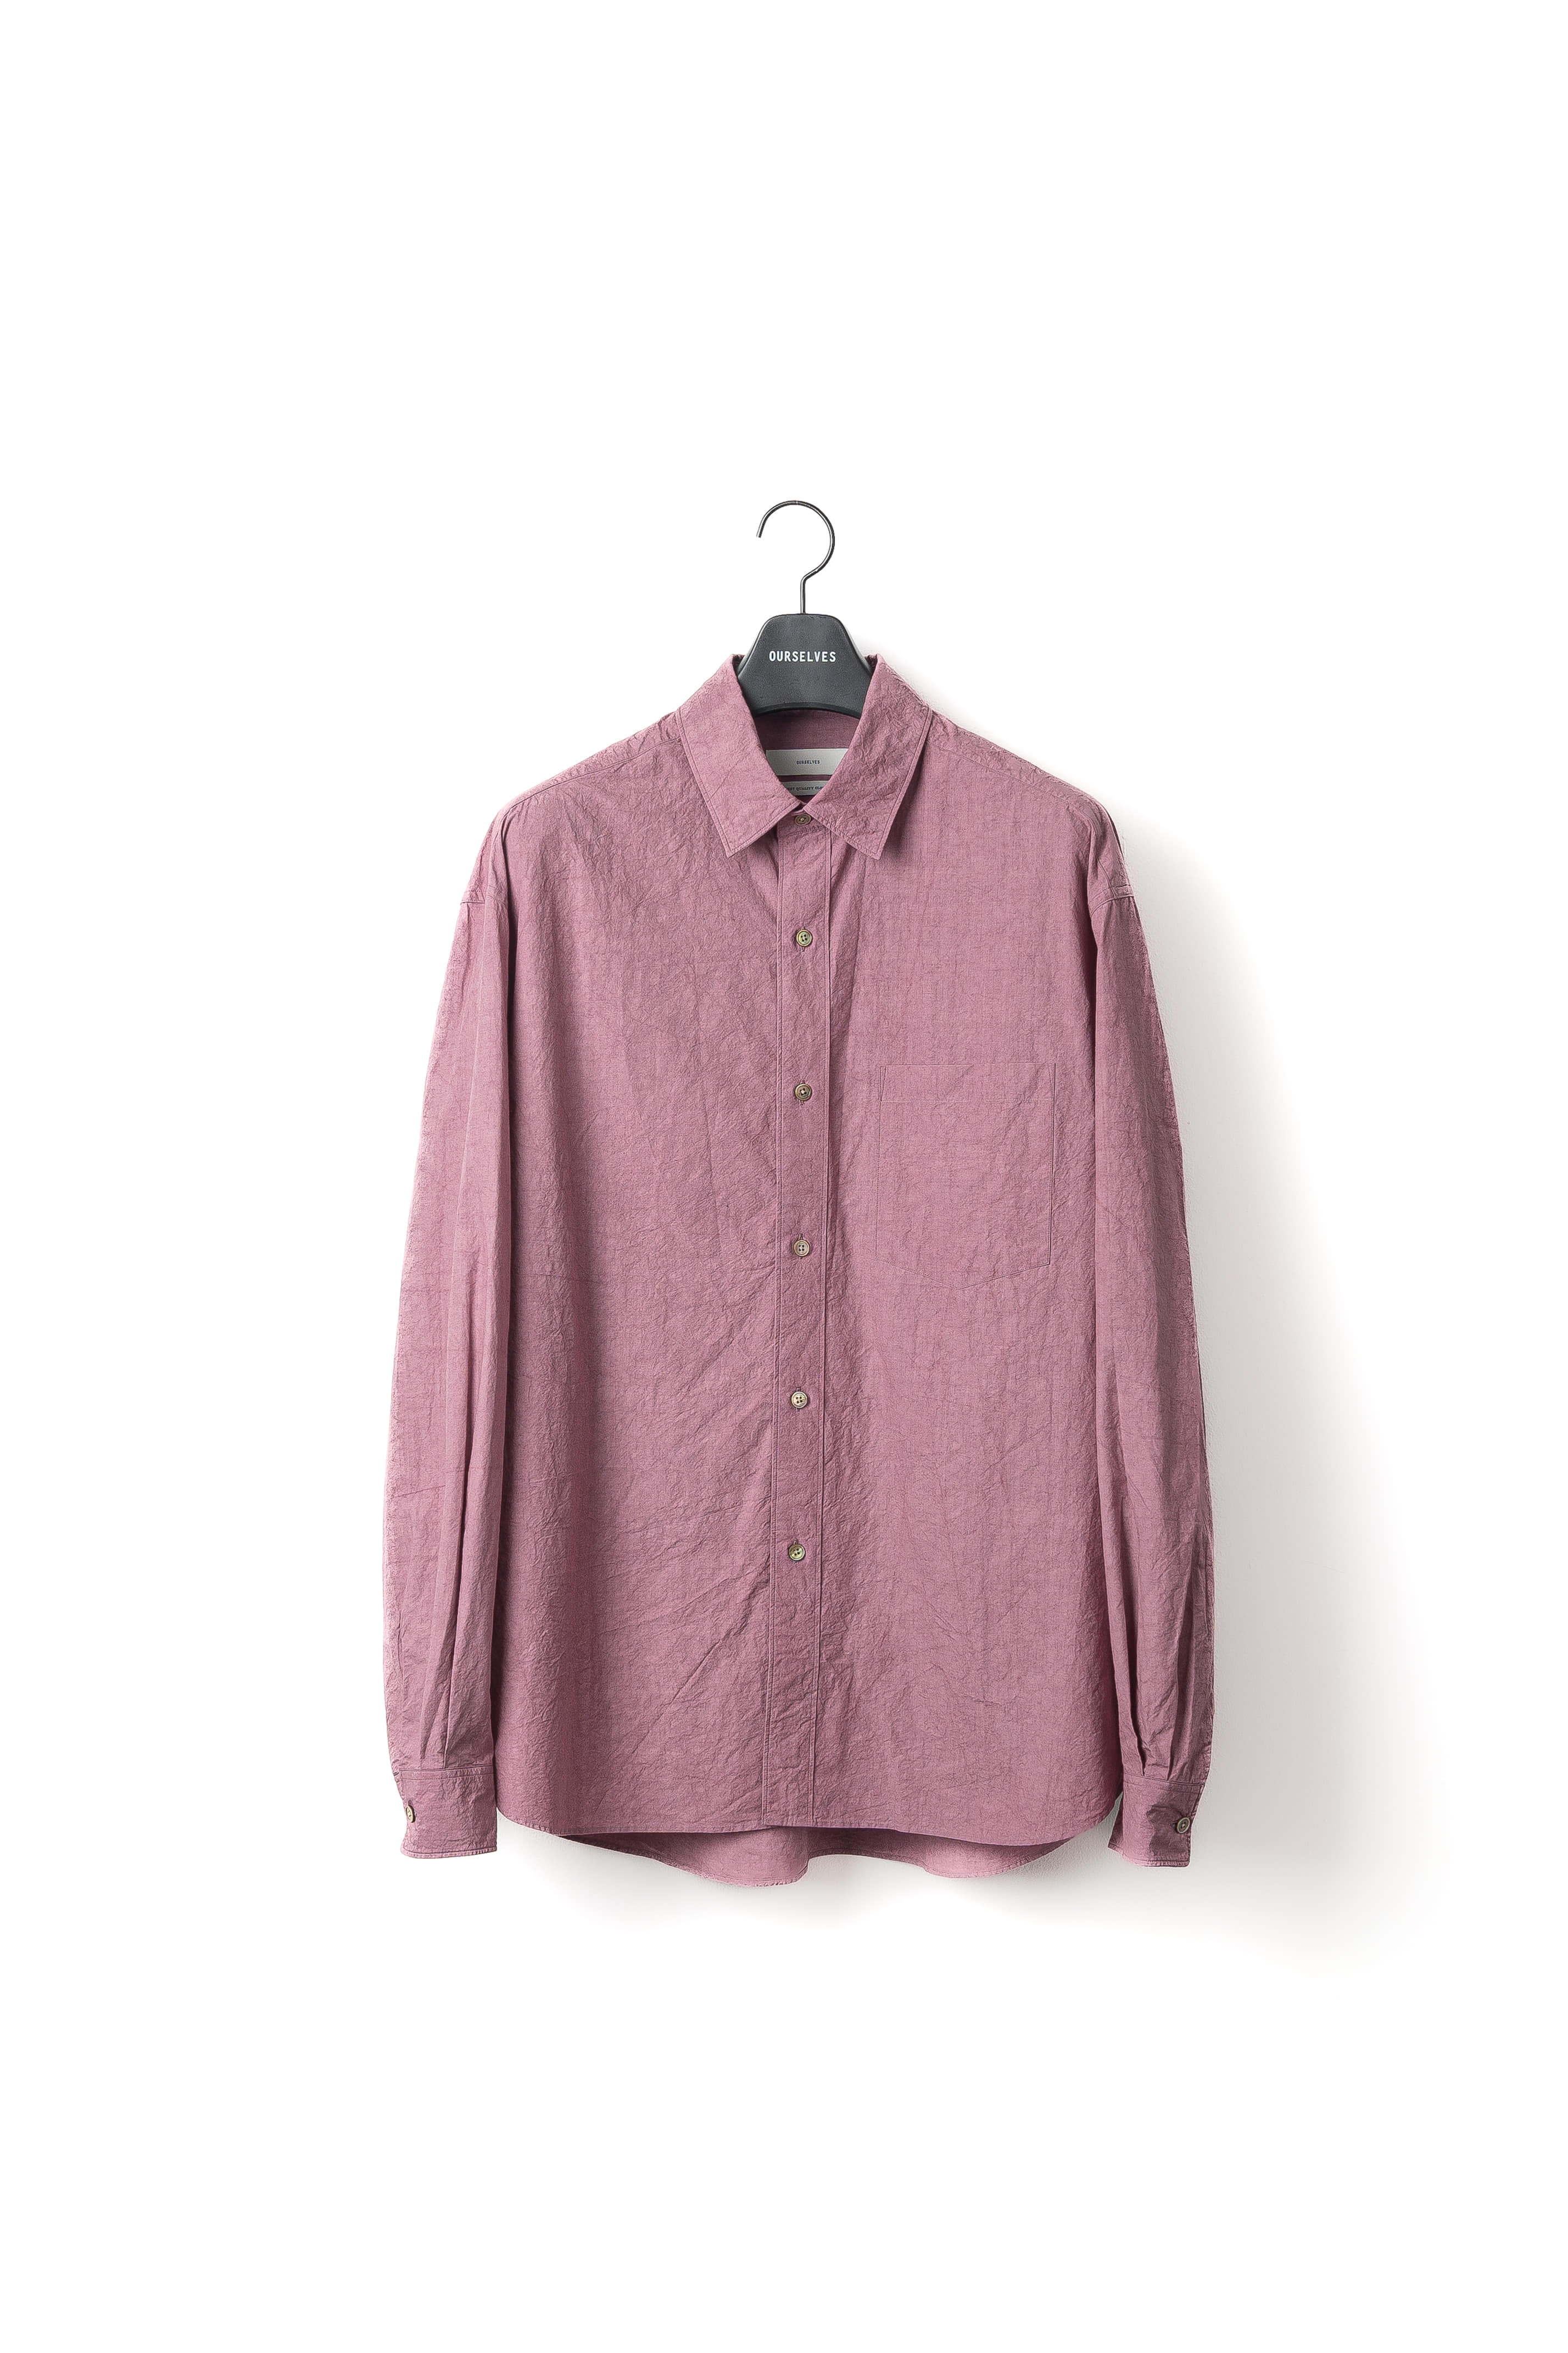 Texture Typewriter Relaxed Shirts - Dusty Pink